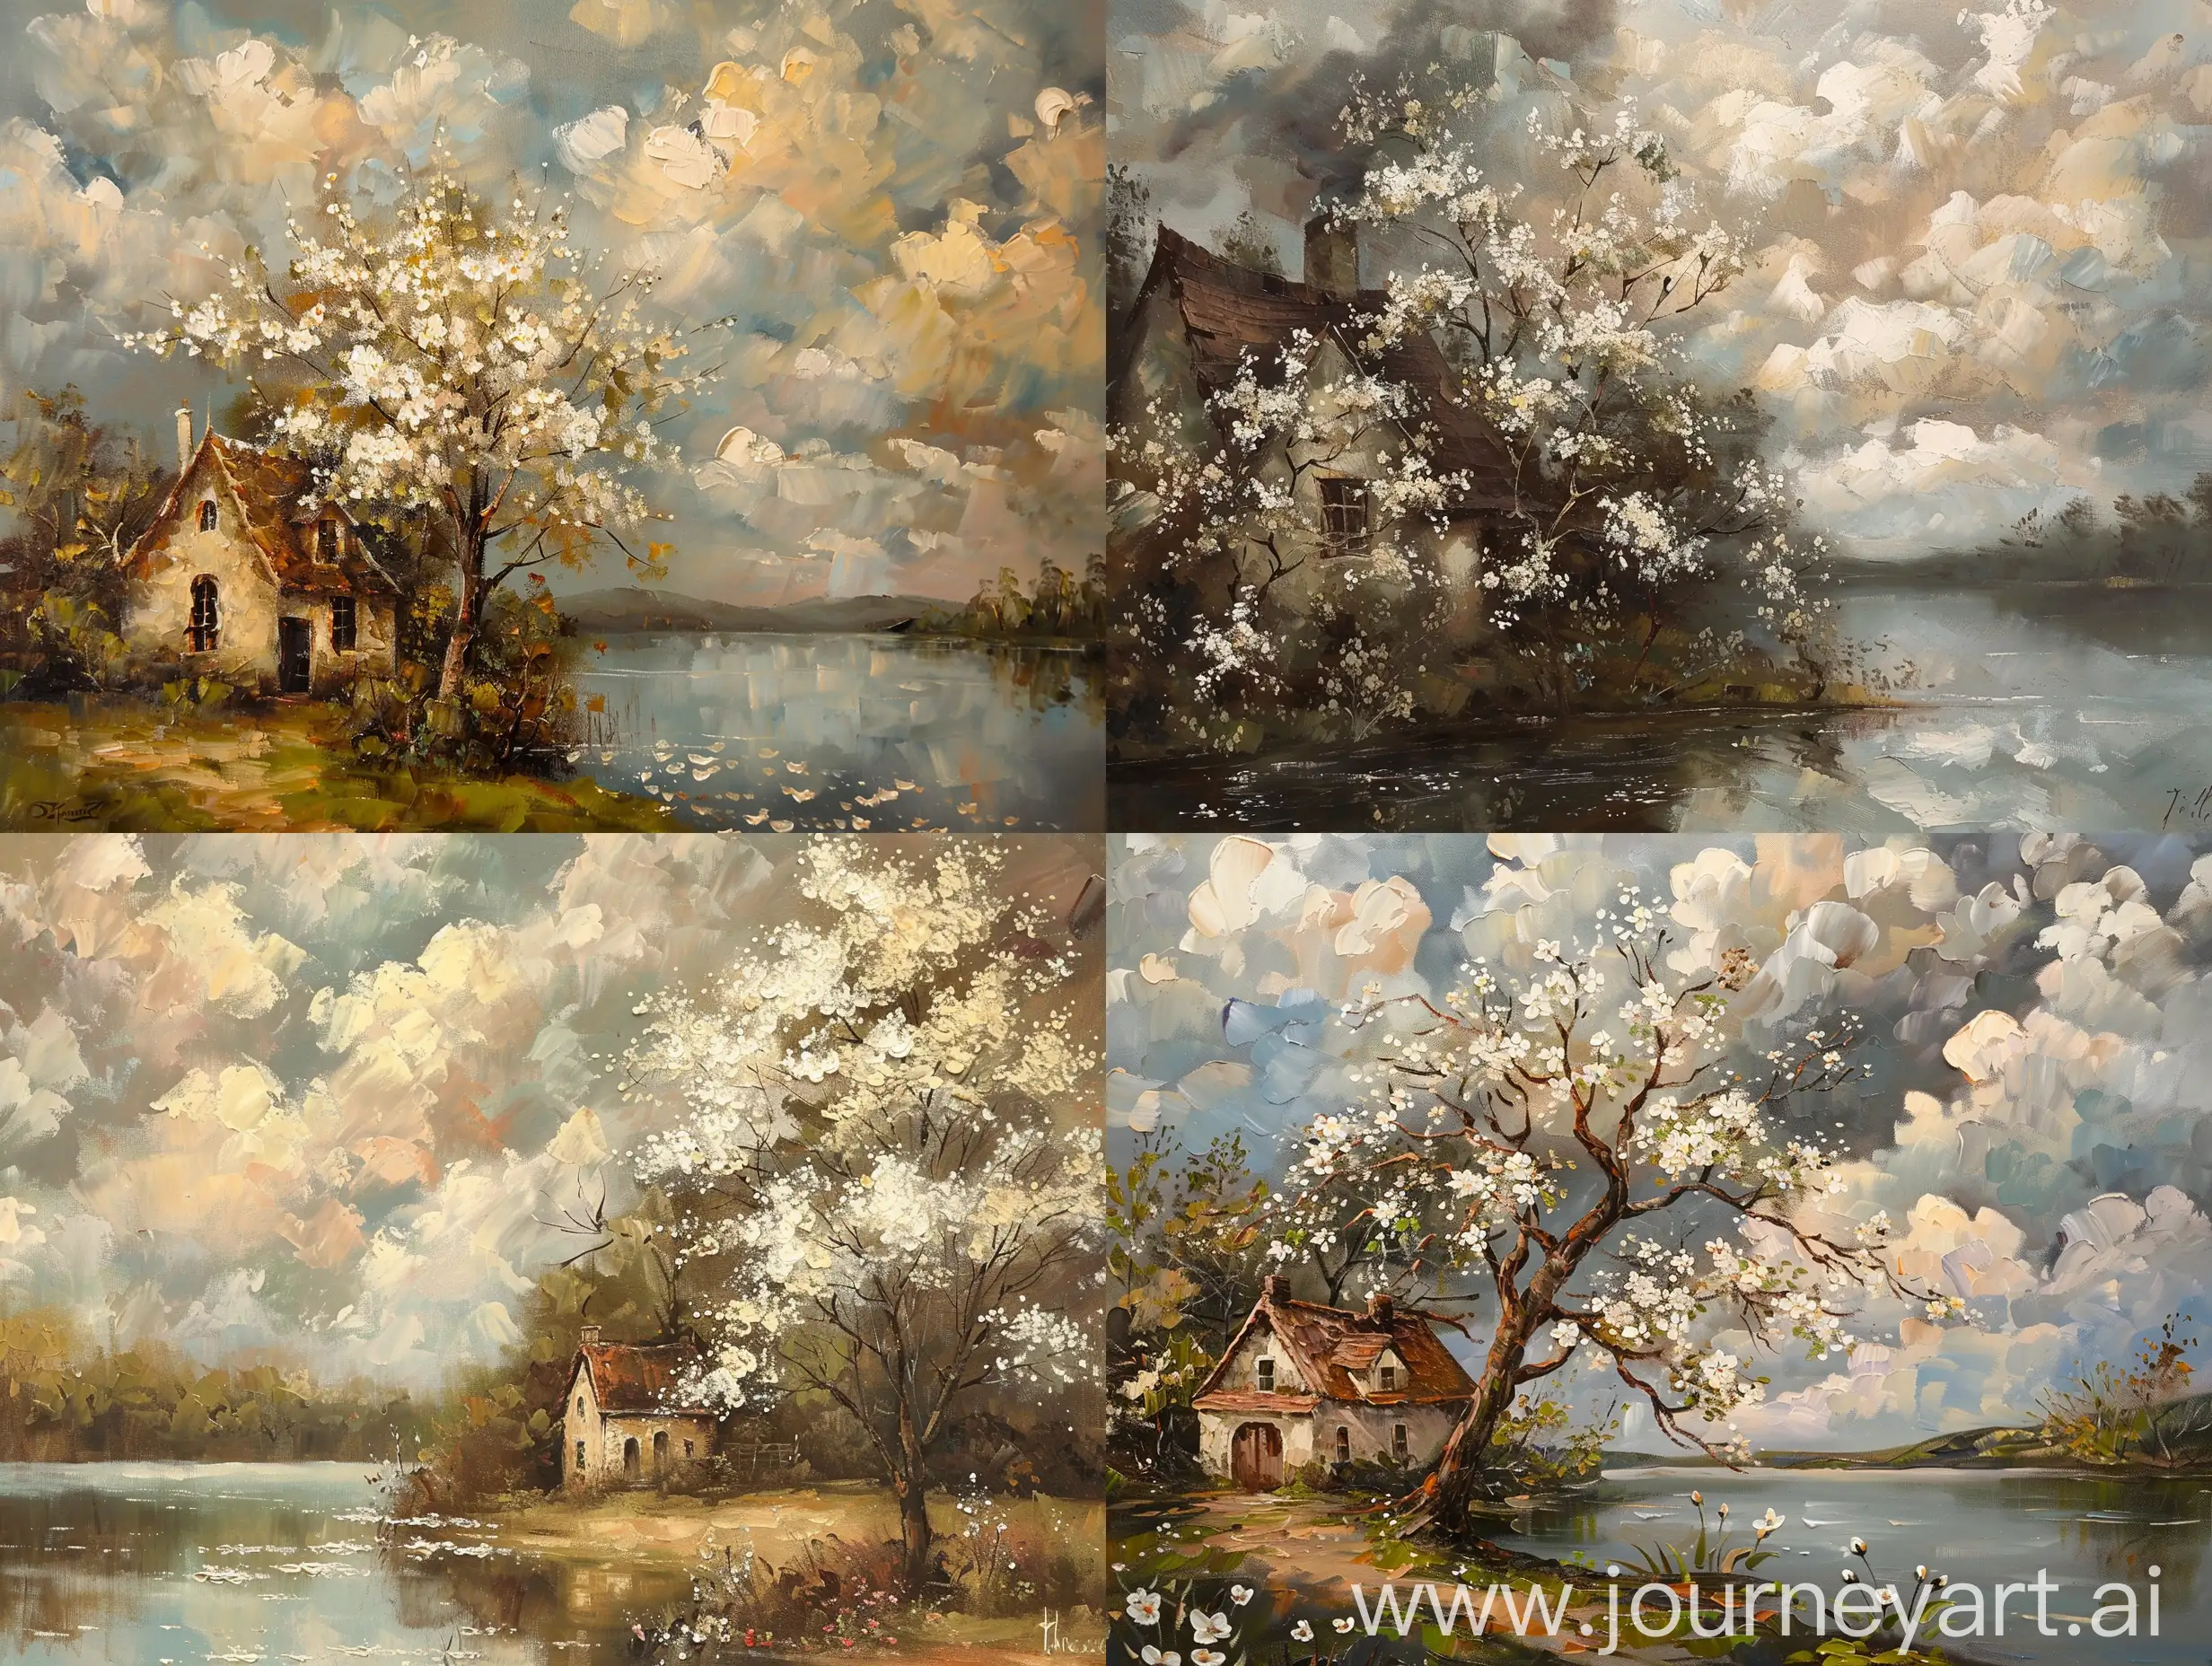 muted dark neutral colors. vintage antique oil painting. impressionism. realism. cloudy sky, clouds, English cottage among the trees. lake, tree blooming with white flowers